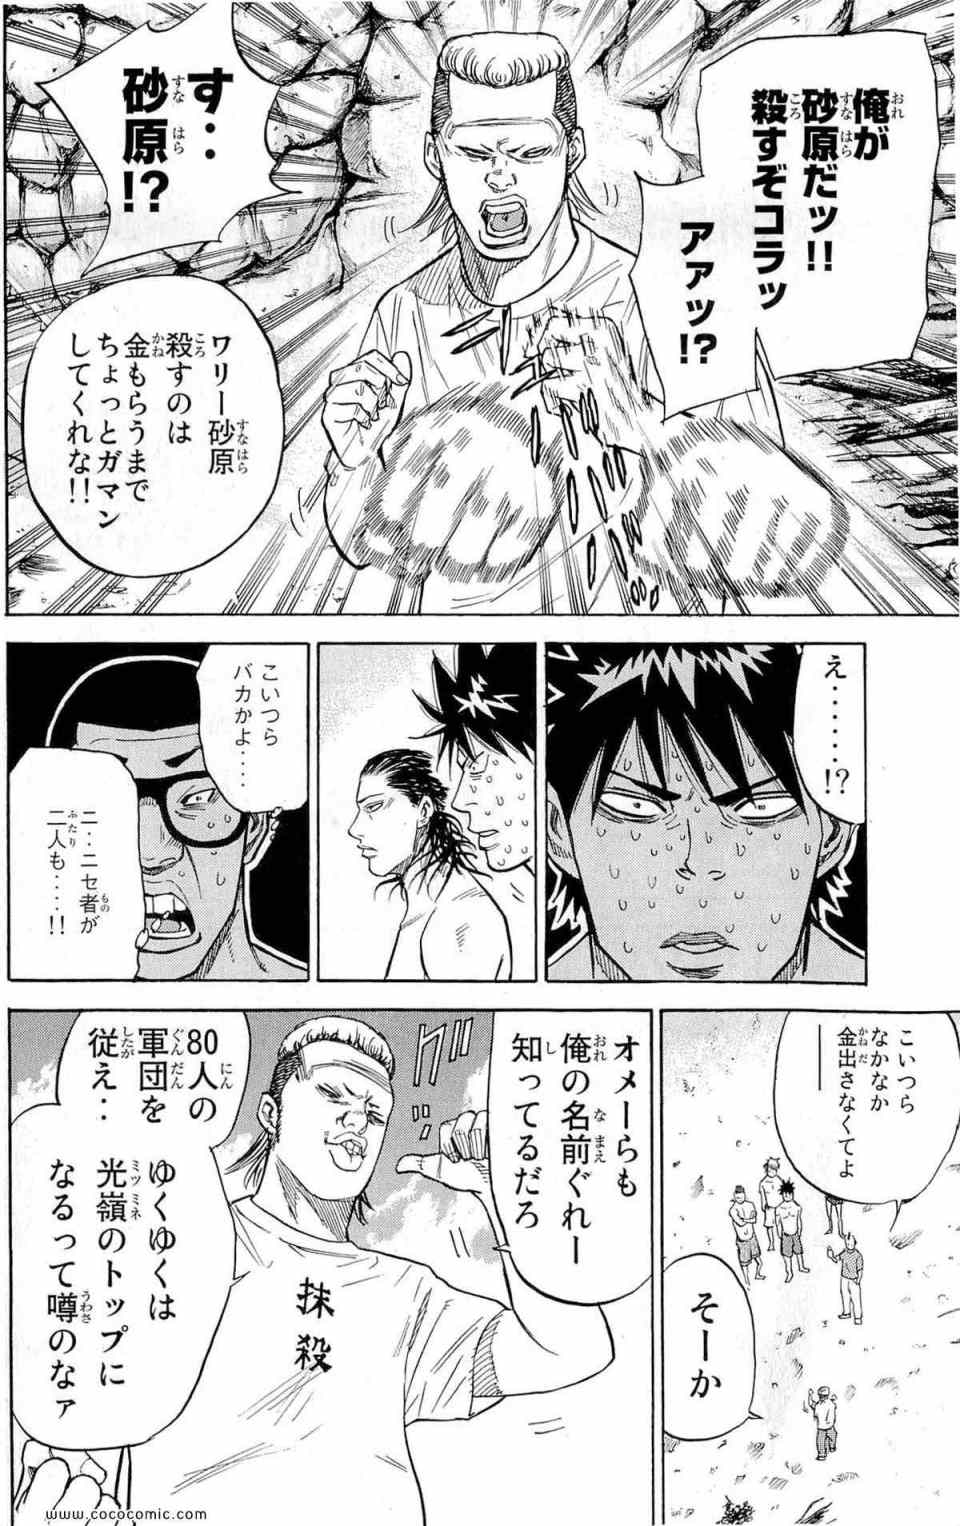 《A-BOUT!(日文)》漫画 A-BOUT! 02卷